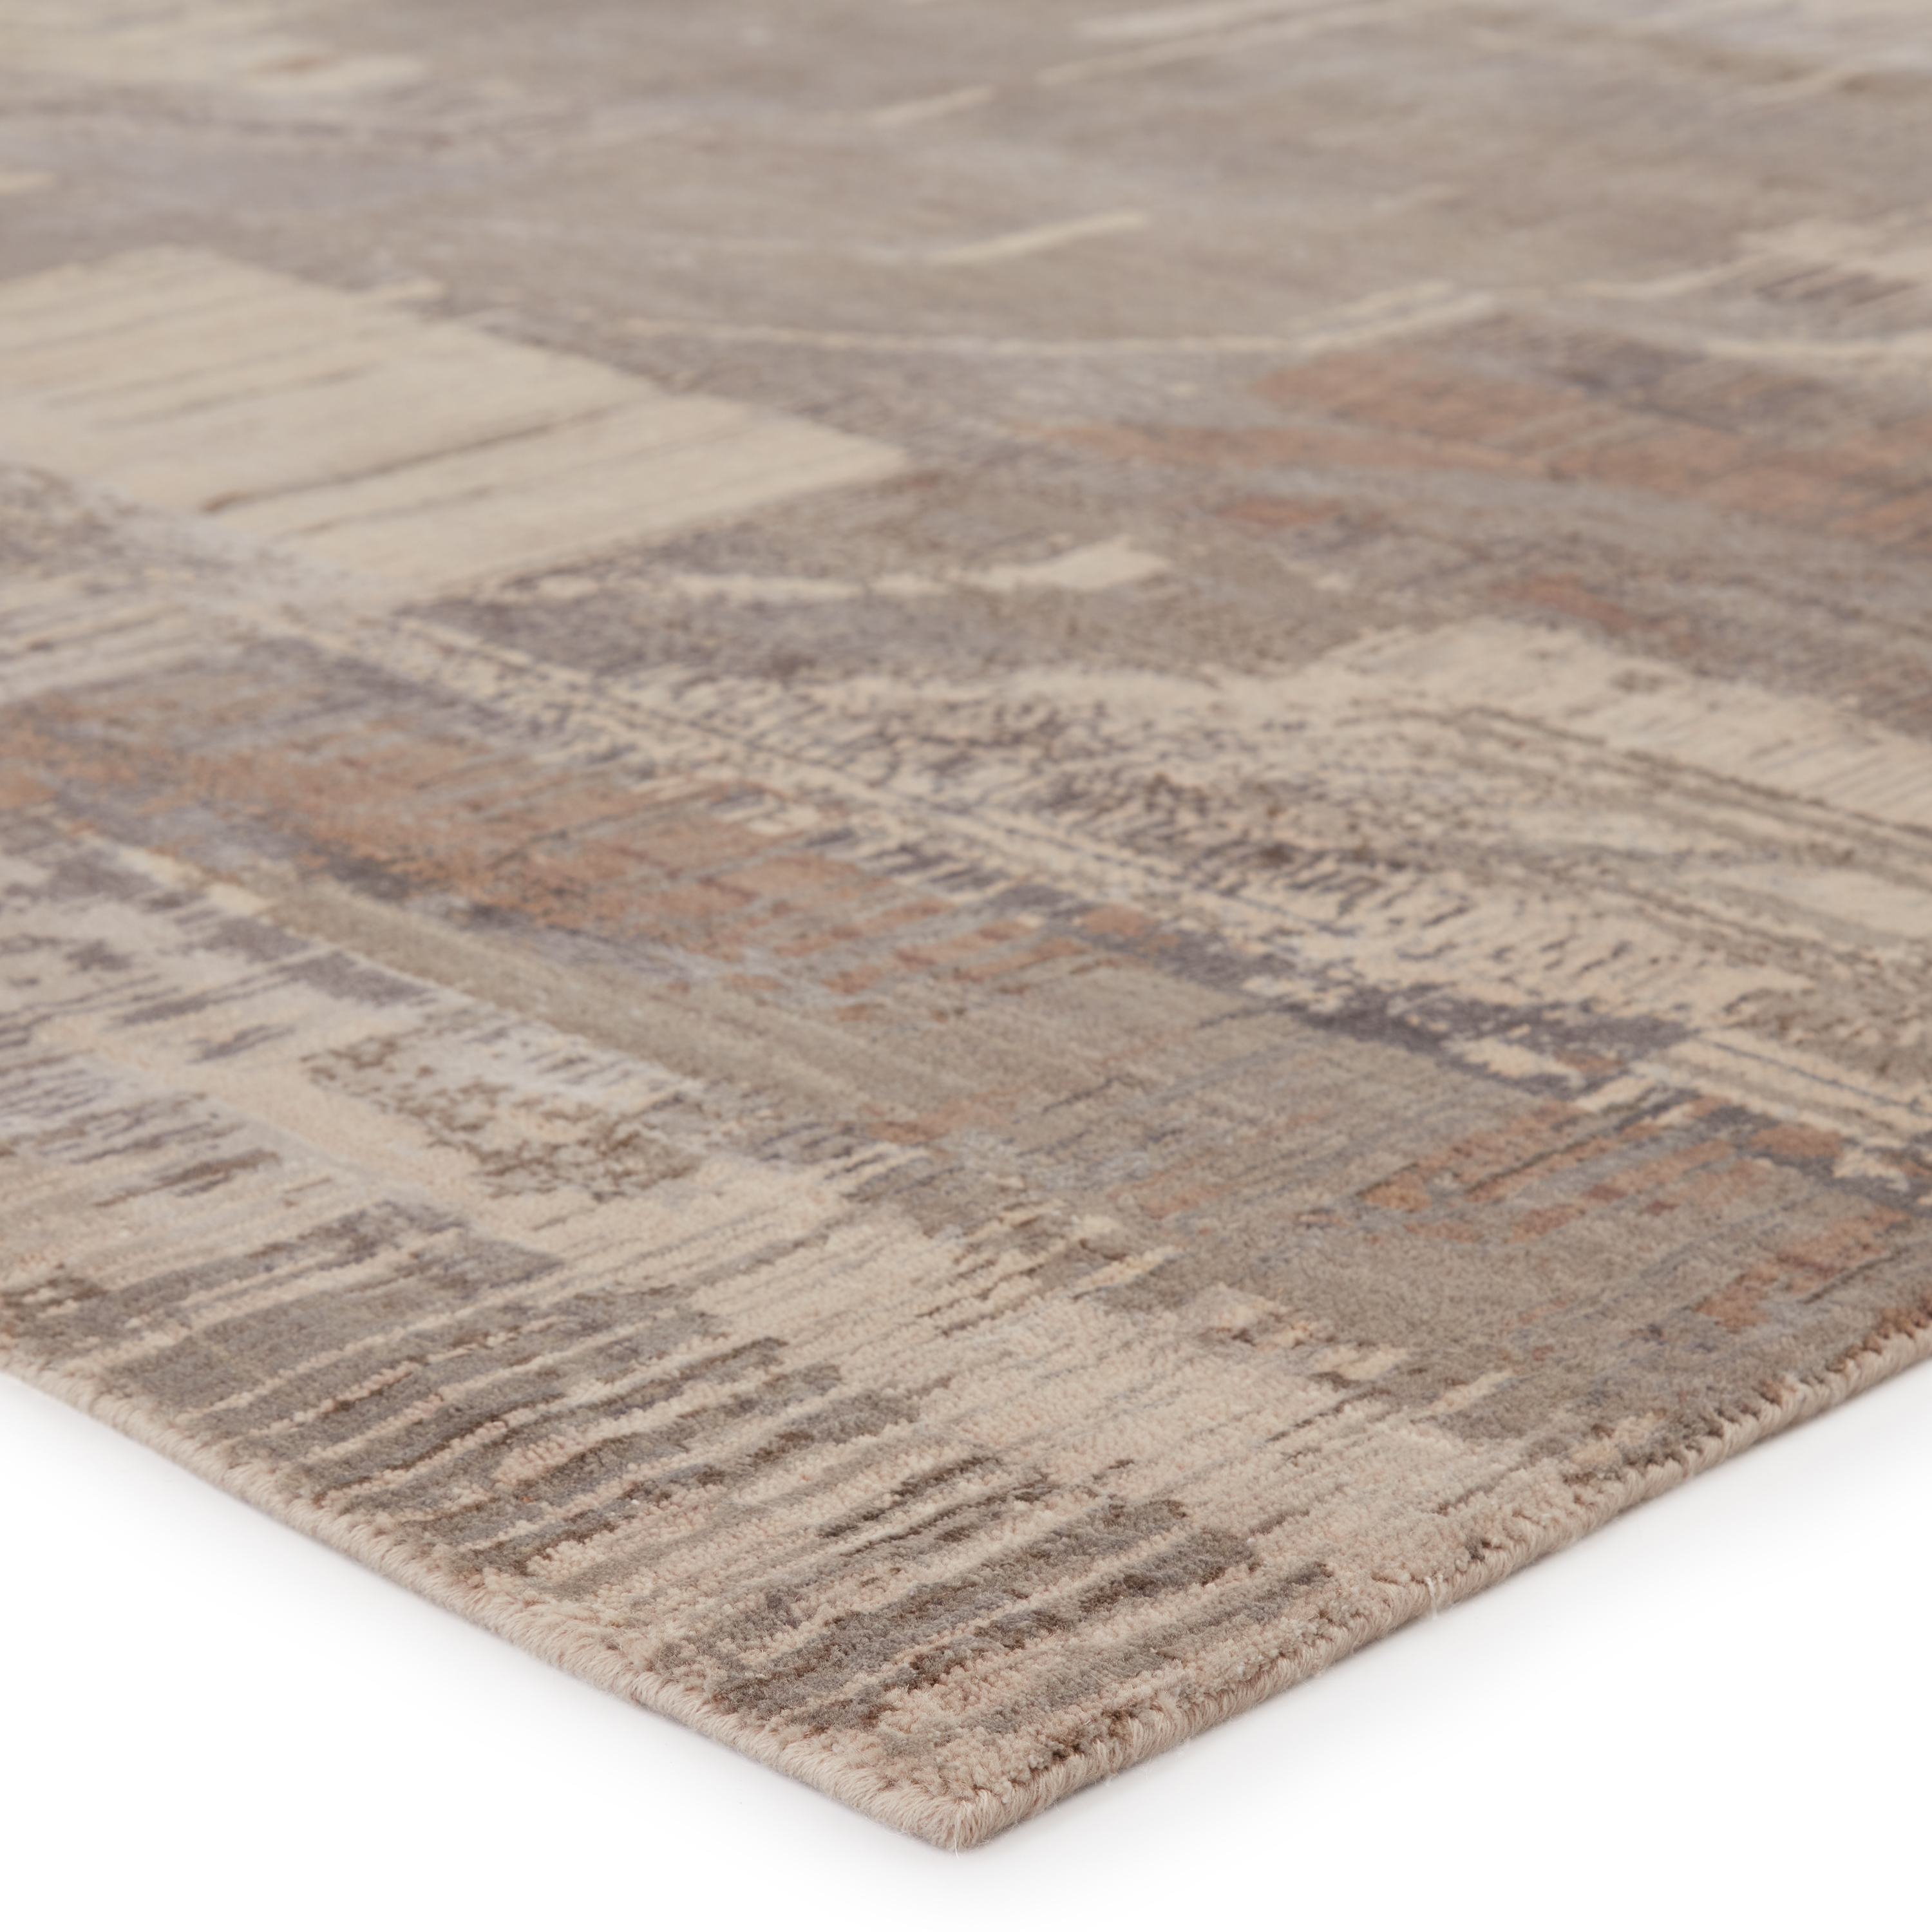 Kavi by Storia Hand-Knotted Abstract Light Gray/ Tan Area Rug (5'6"X8') - Image 1